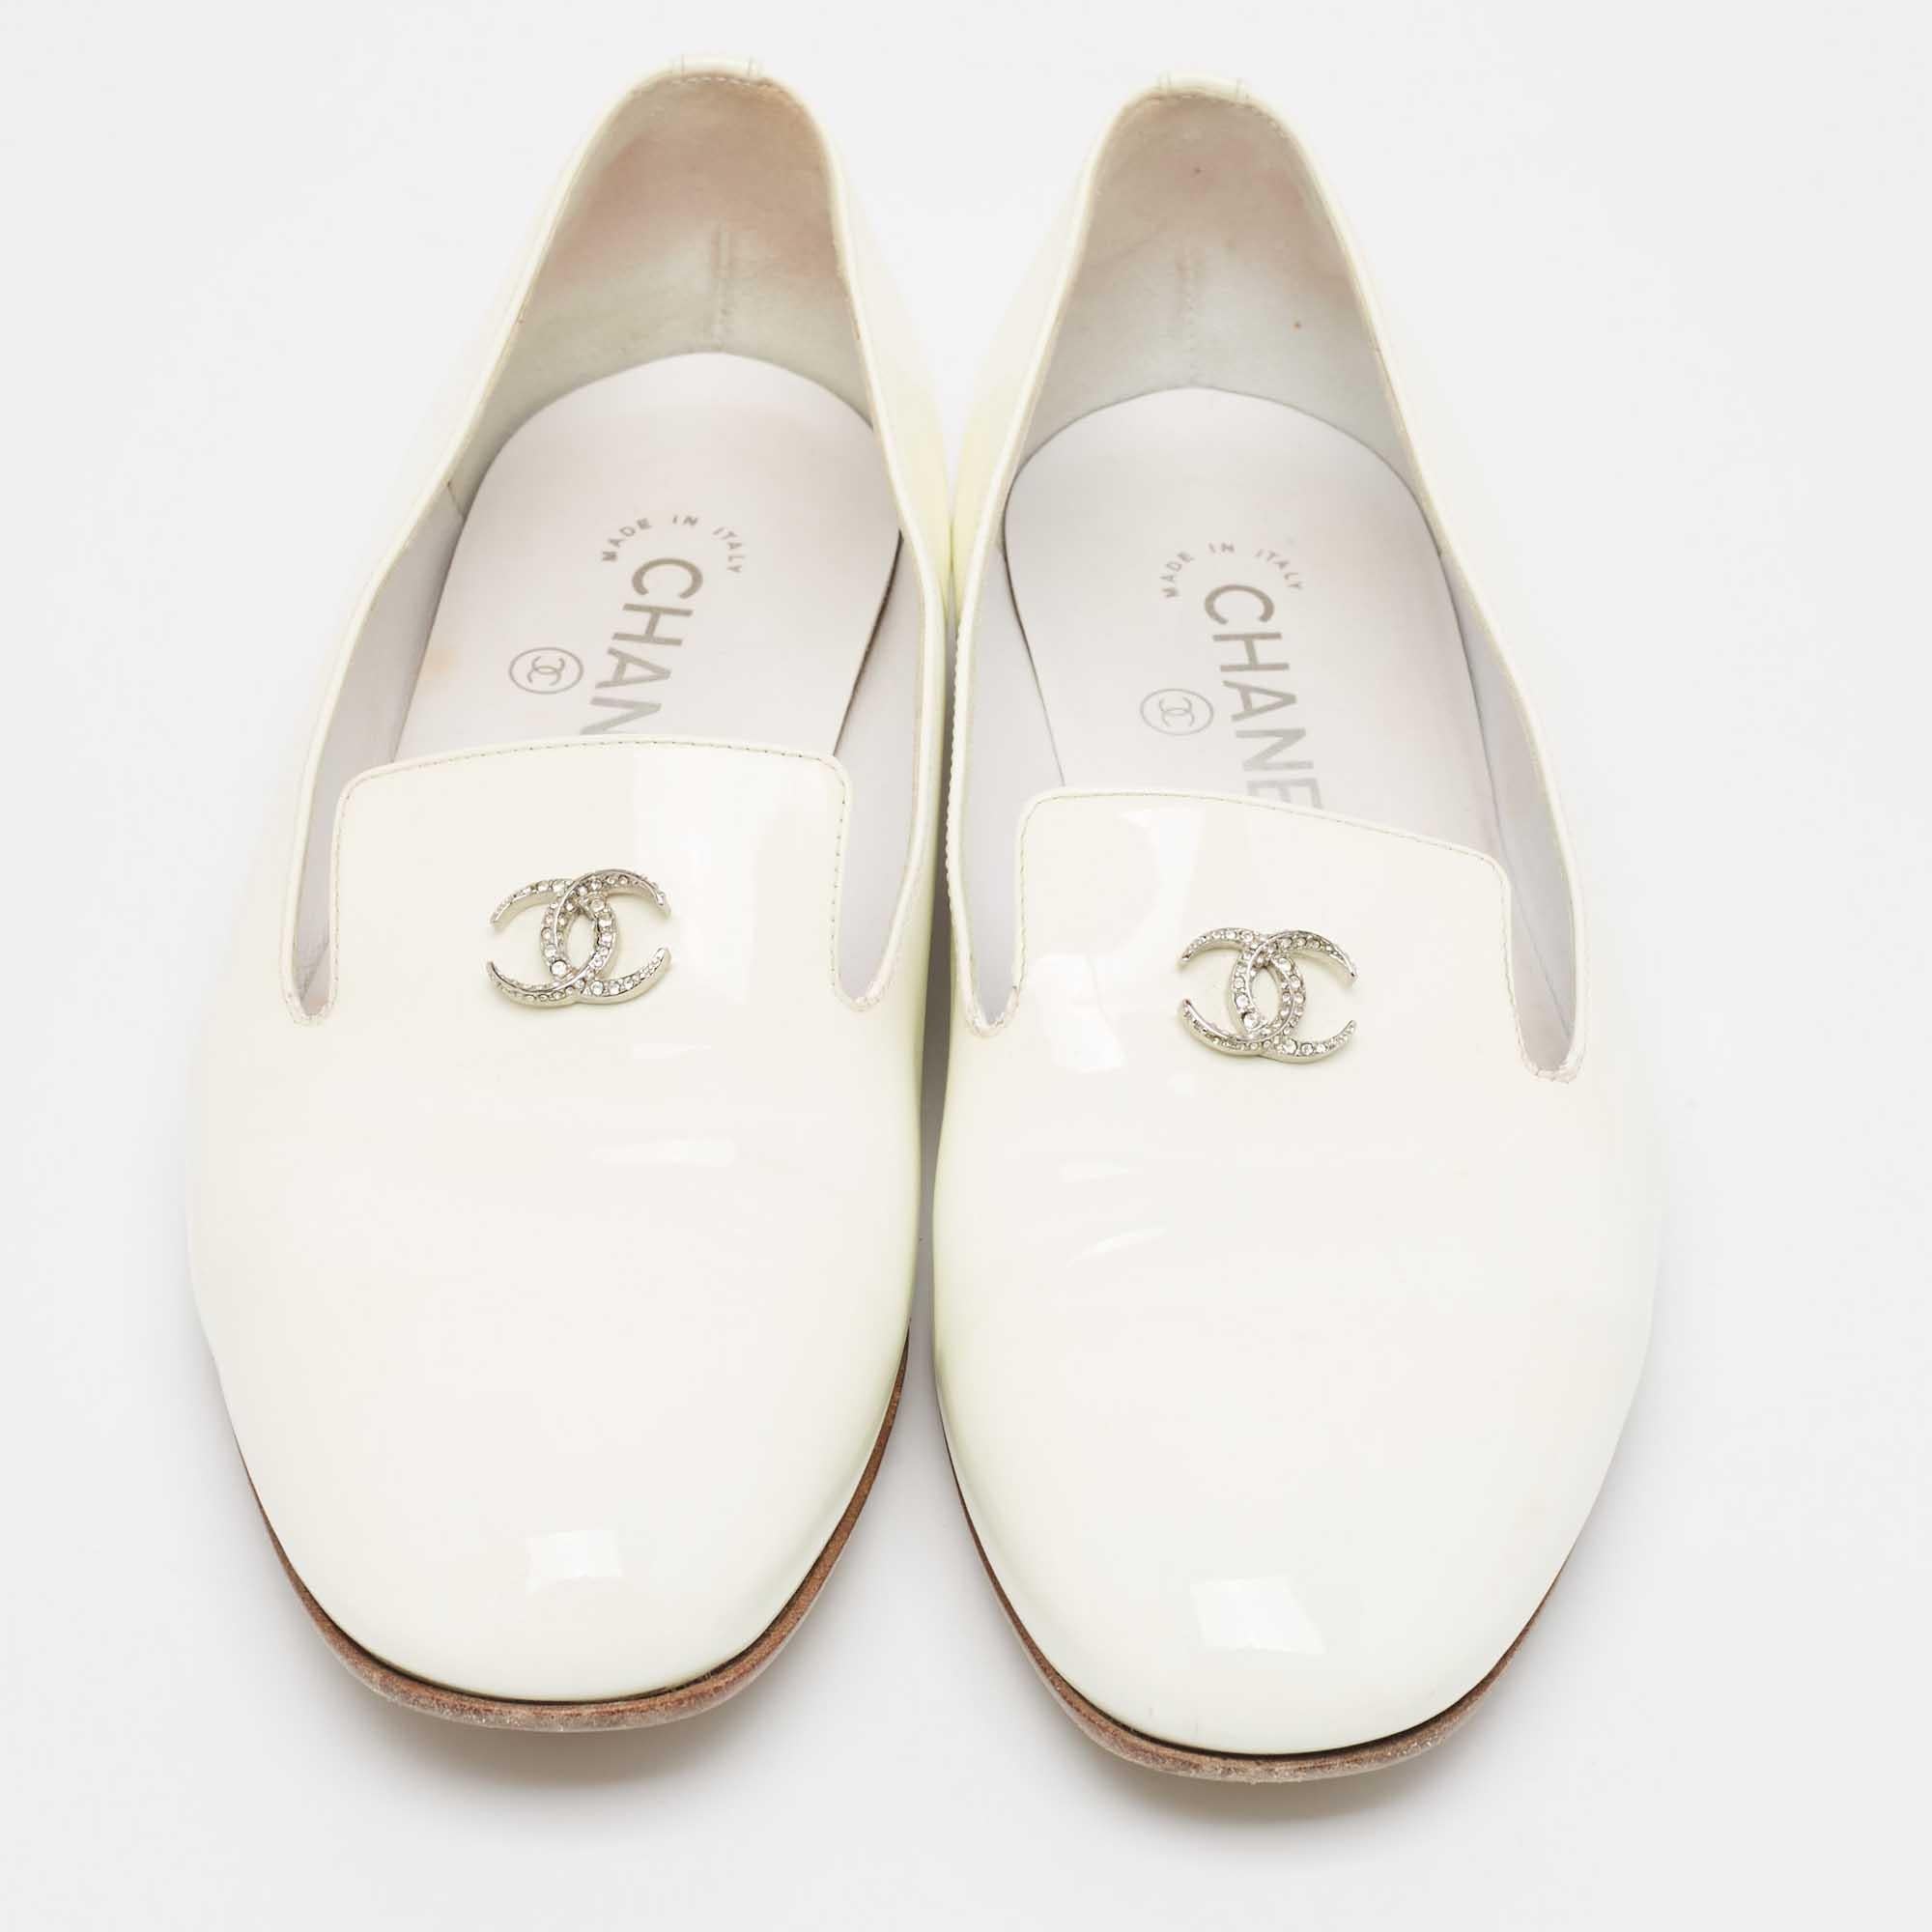 Practical, fashionable, and durable—these Chanel CC smoking loafers are carefully built to be fine companions to your everyday style. They come made using the best materials to be a prized buy.

